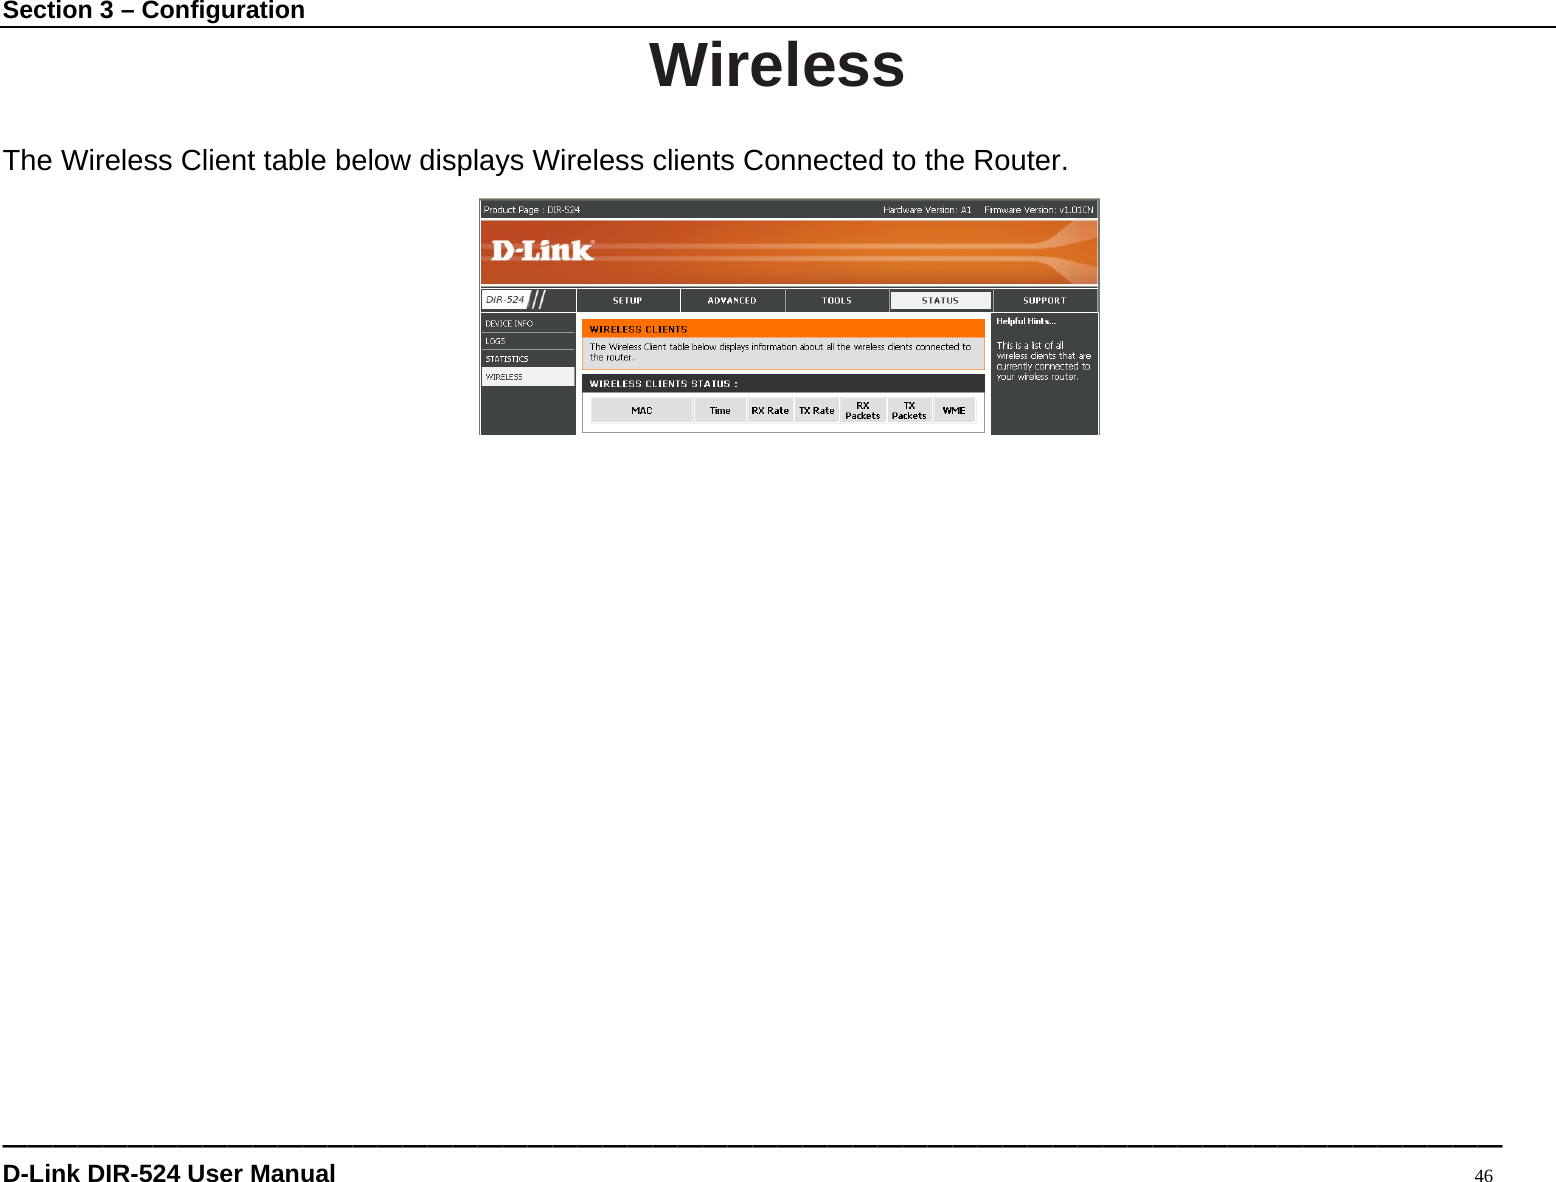 Section 3 – Configuration ———————————————————————————————————————————————————————————— D-Link DIR-524 User Manual                                                                                           46 Wireless  The Wireless Client table below displays Wireless clients Connected to the Router.                      